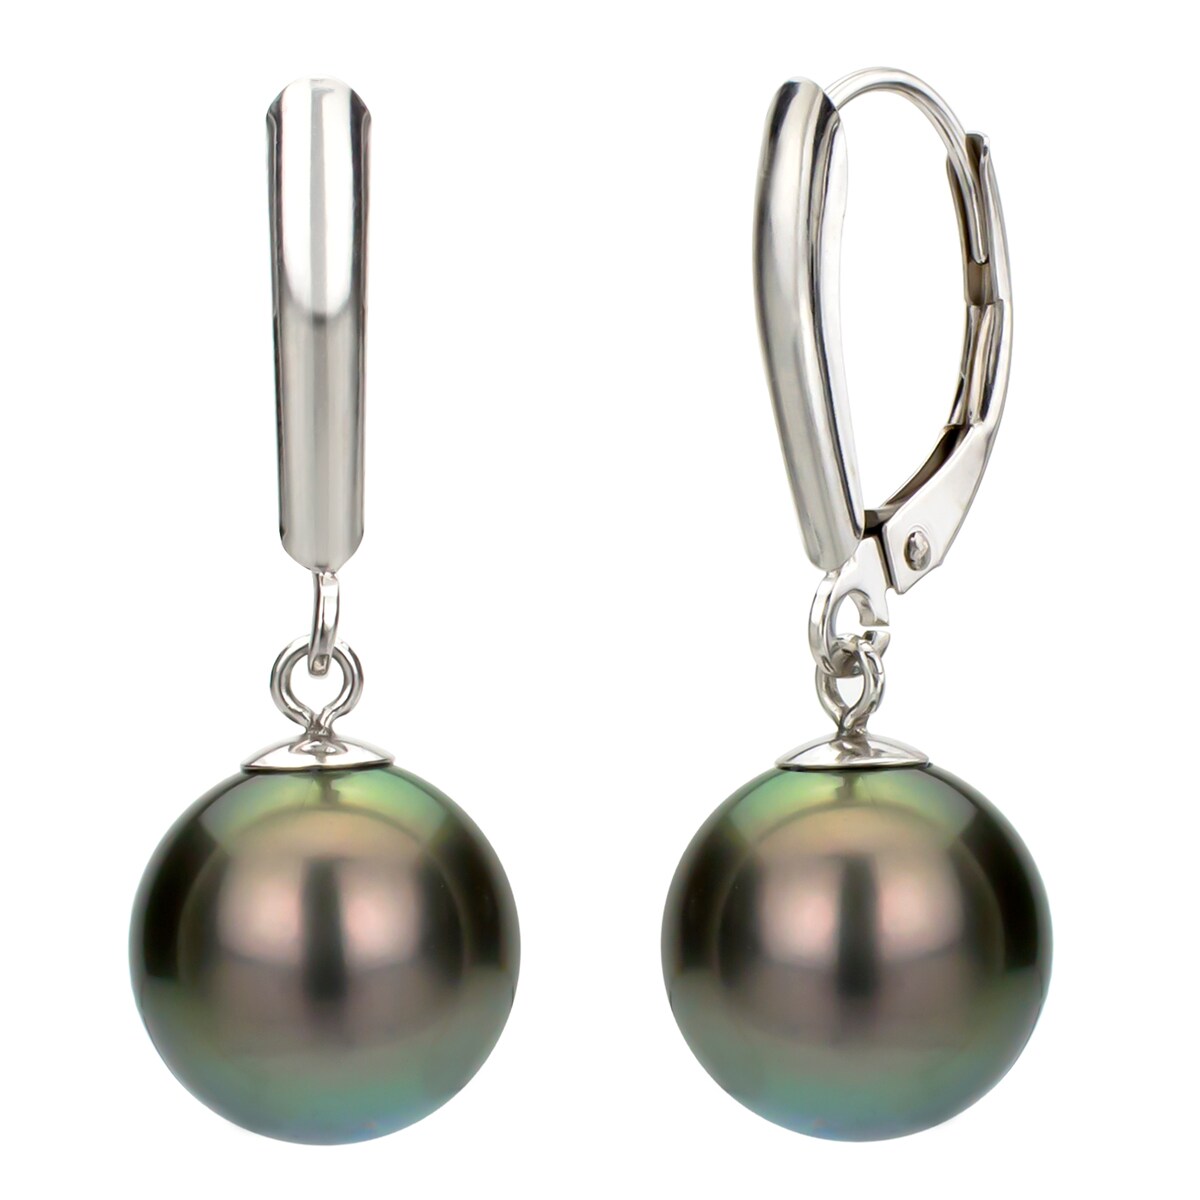 Charming AAA 10-11mm Real natural Tahitian black round pearl earrings 925 silver 